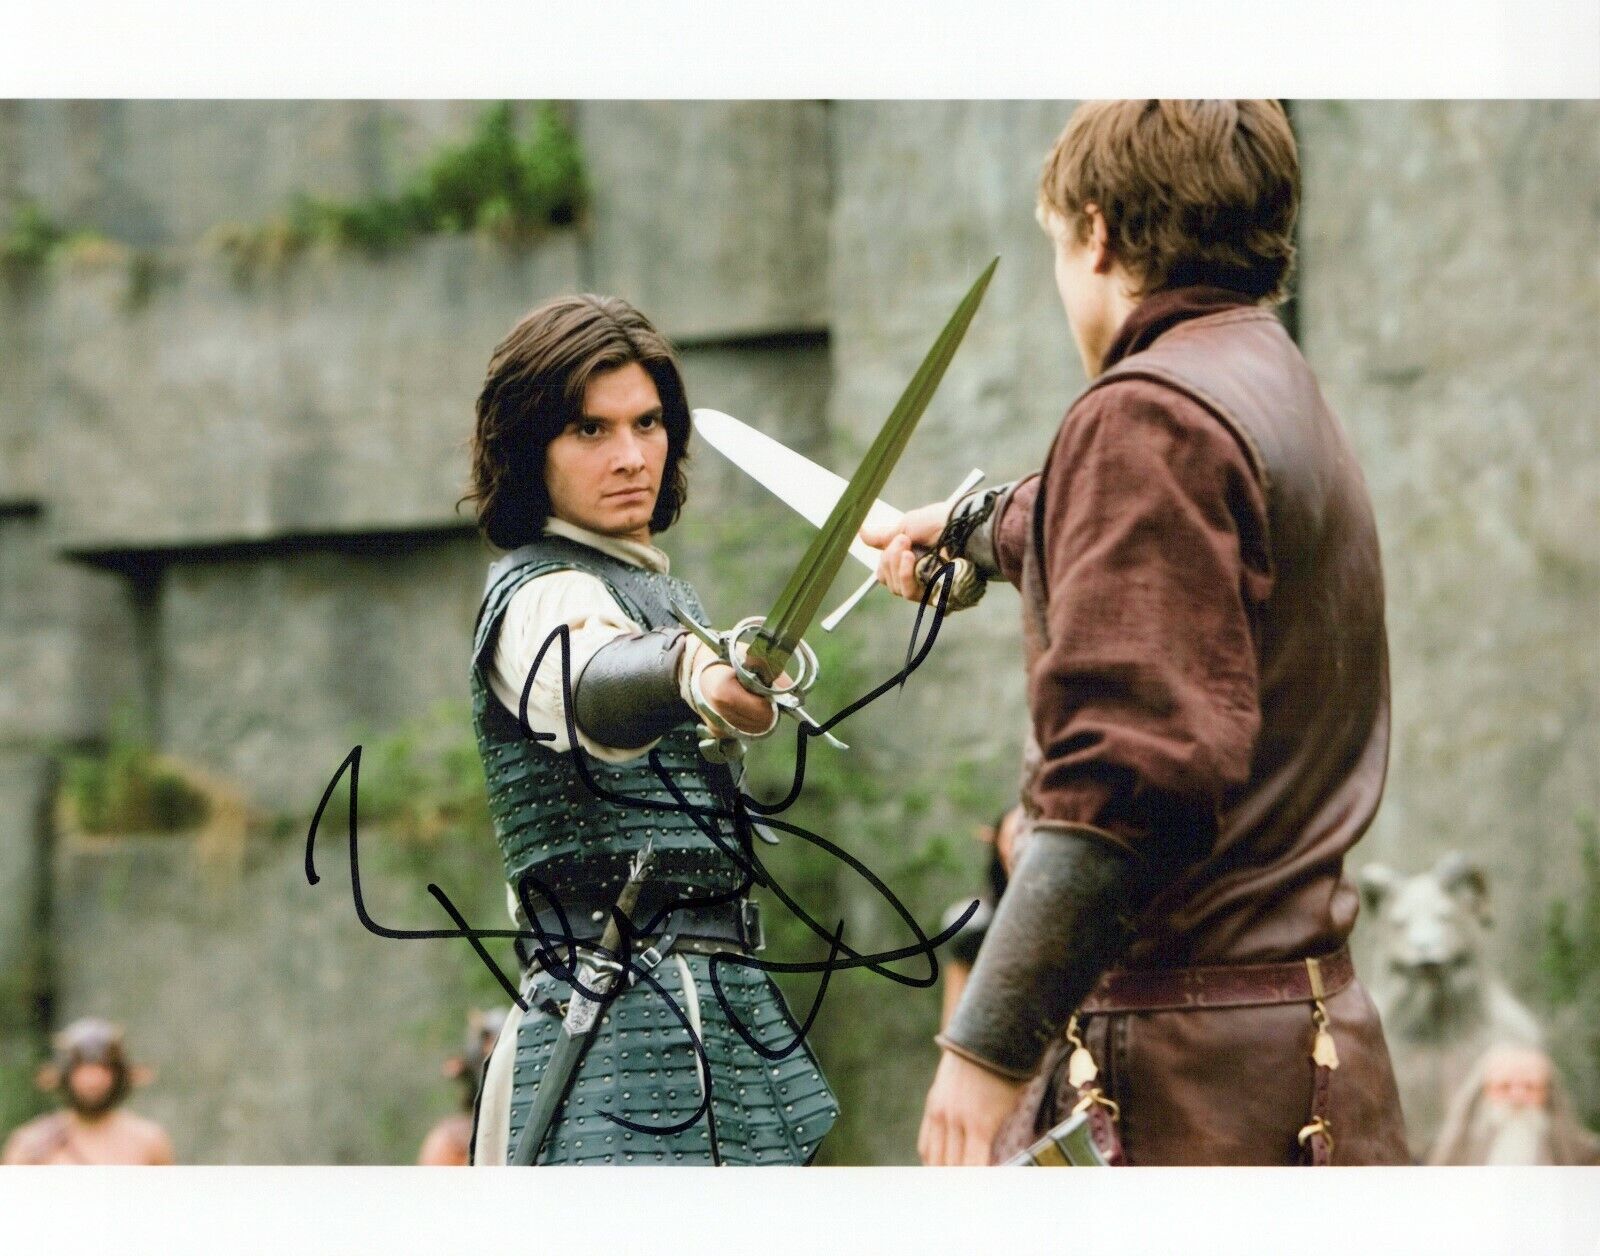 Ben Barnes Chronicles Of Narnia Prince Caspian autographed Photo Poster painting signed 8x10 #18